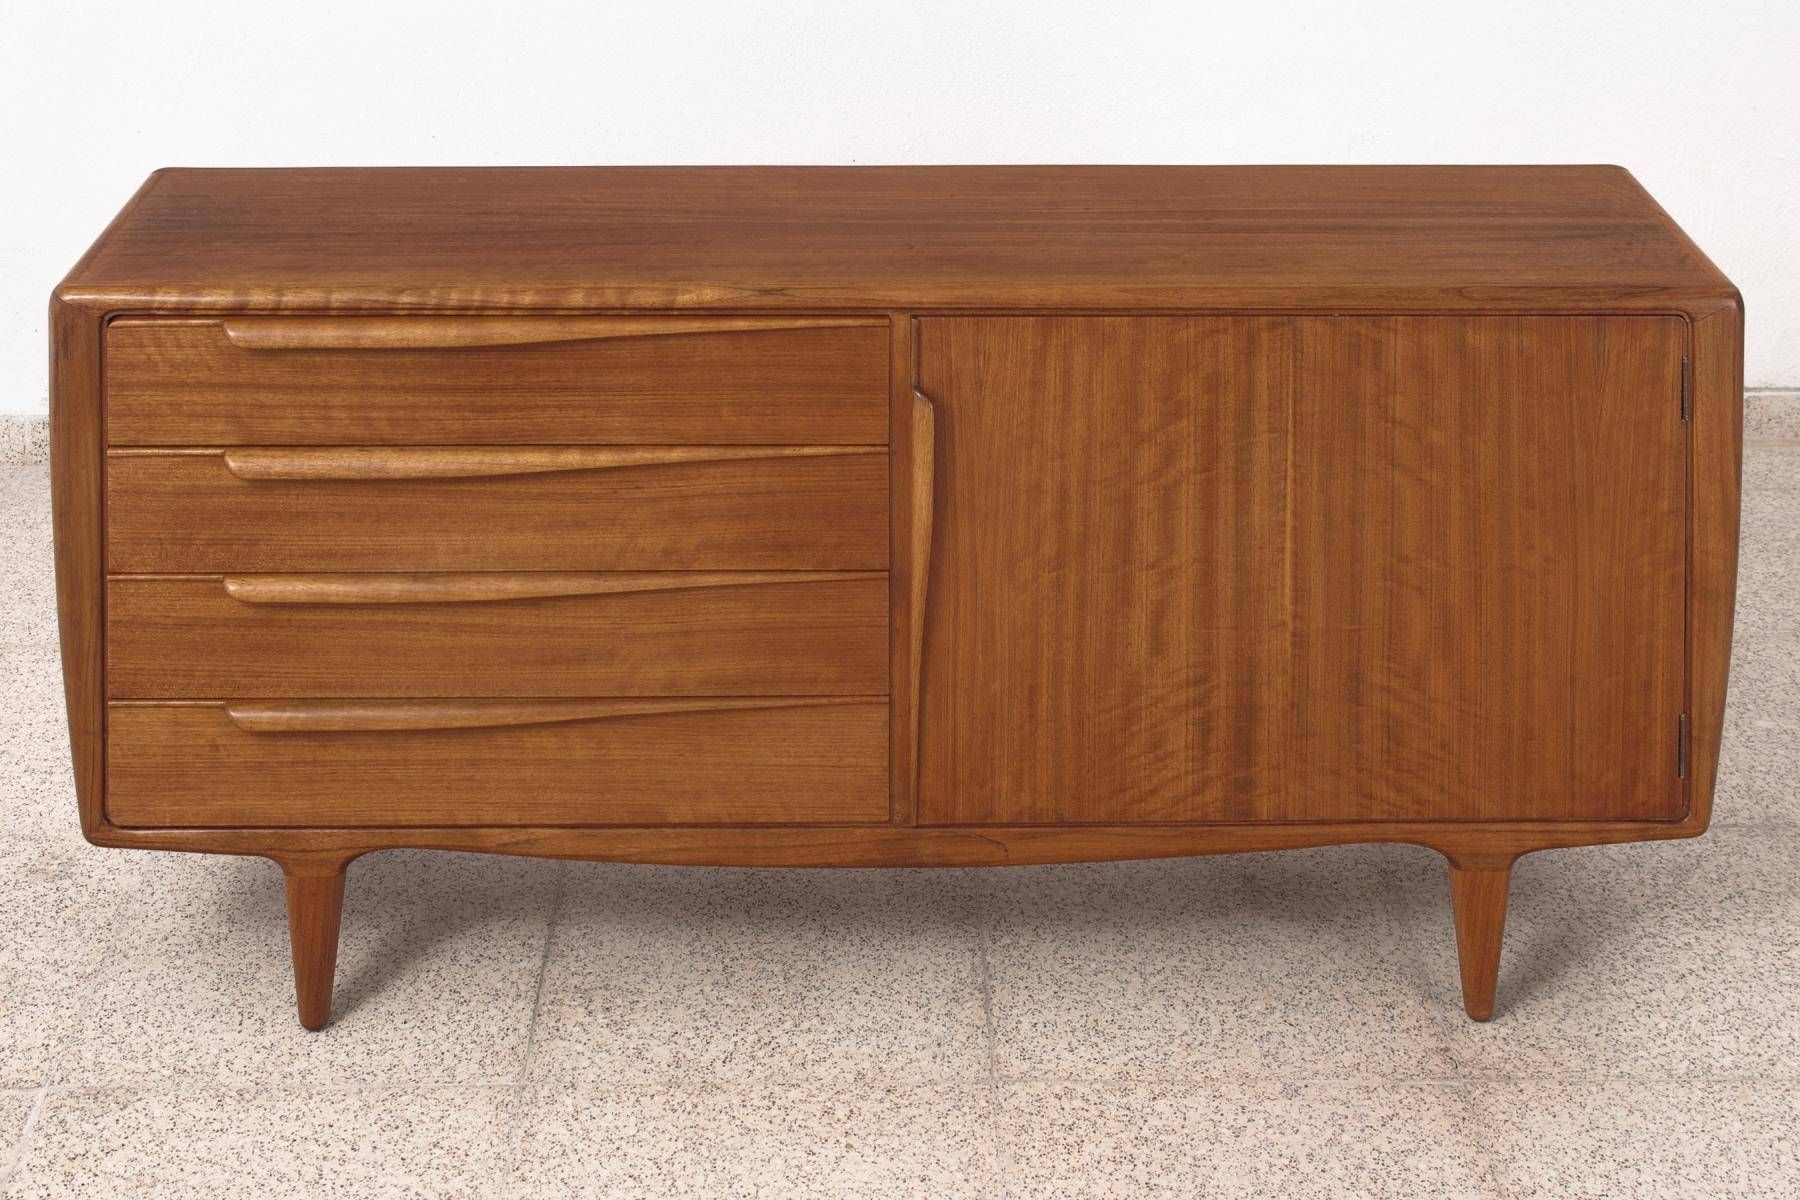 Danish Curved Teak Wood Sideboard, 1960s For Sale At Pamono For Curved Sideboards (View 15 of 15)